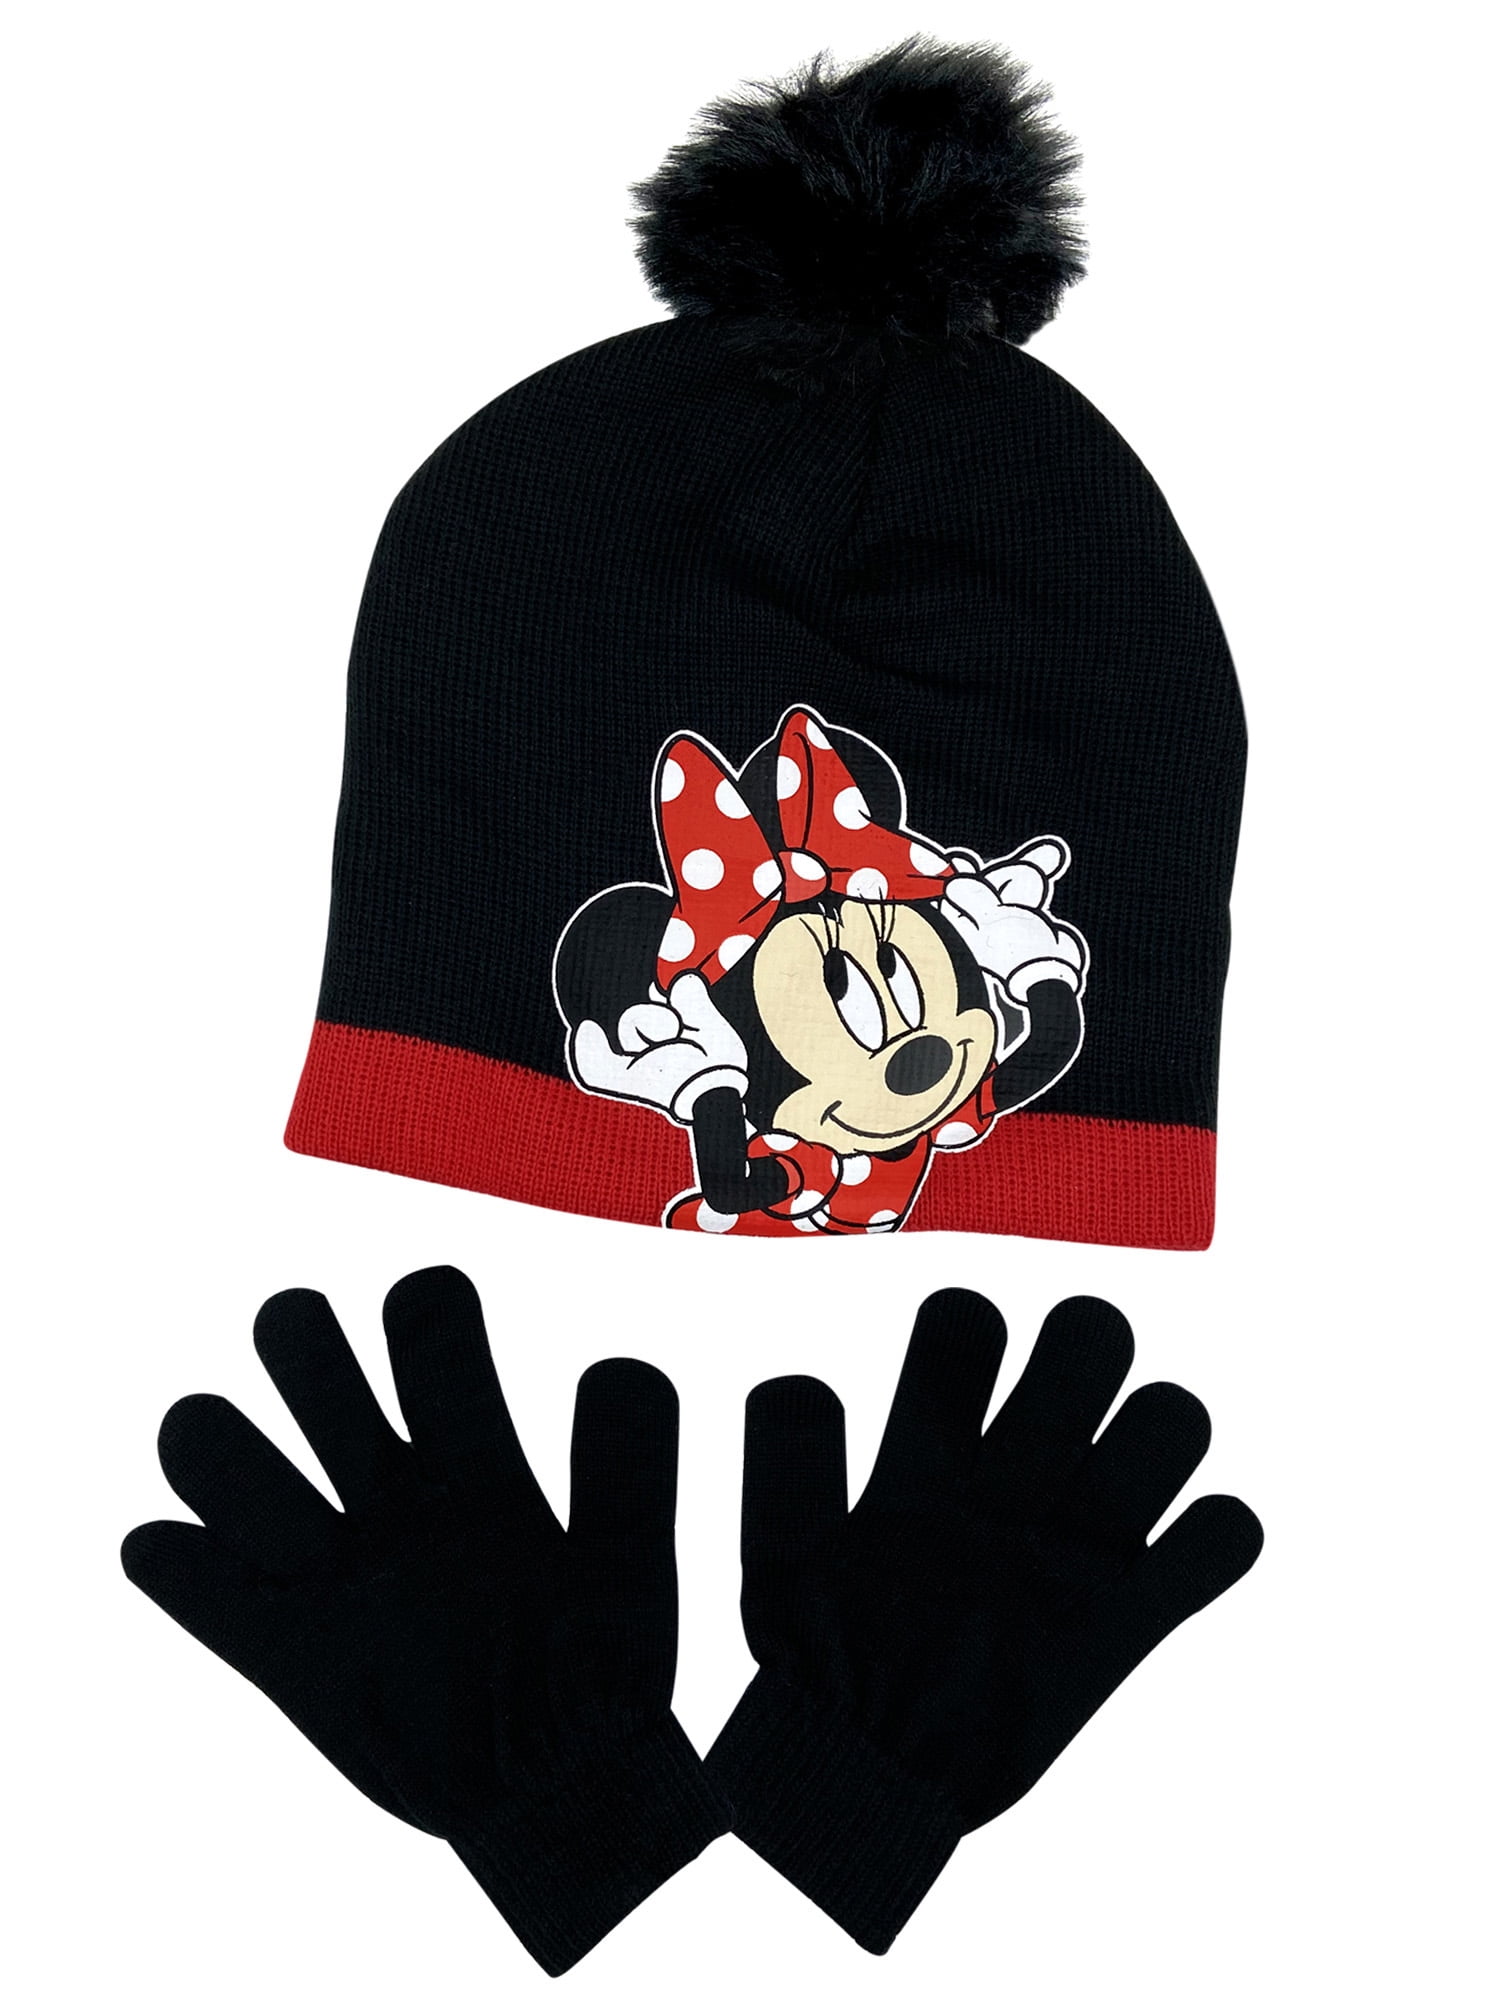 Disney MINNIE MOUSE Knit HAT BEANIE Cap & MITTENS SET Toddler Size NWT 